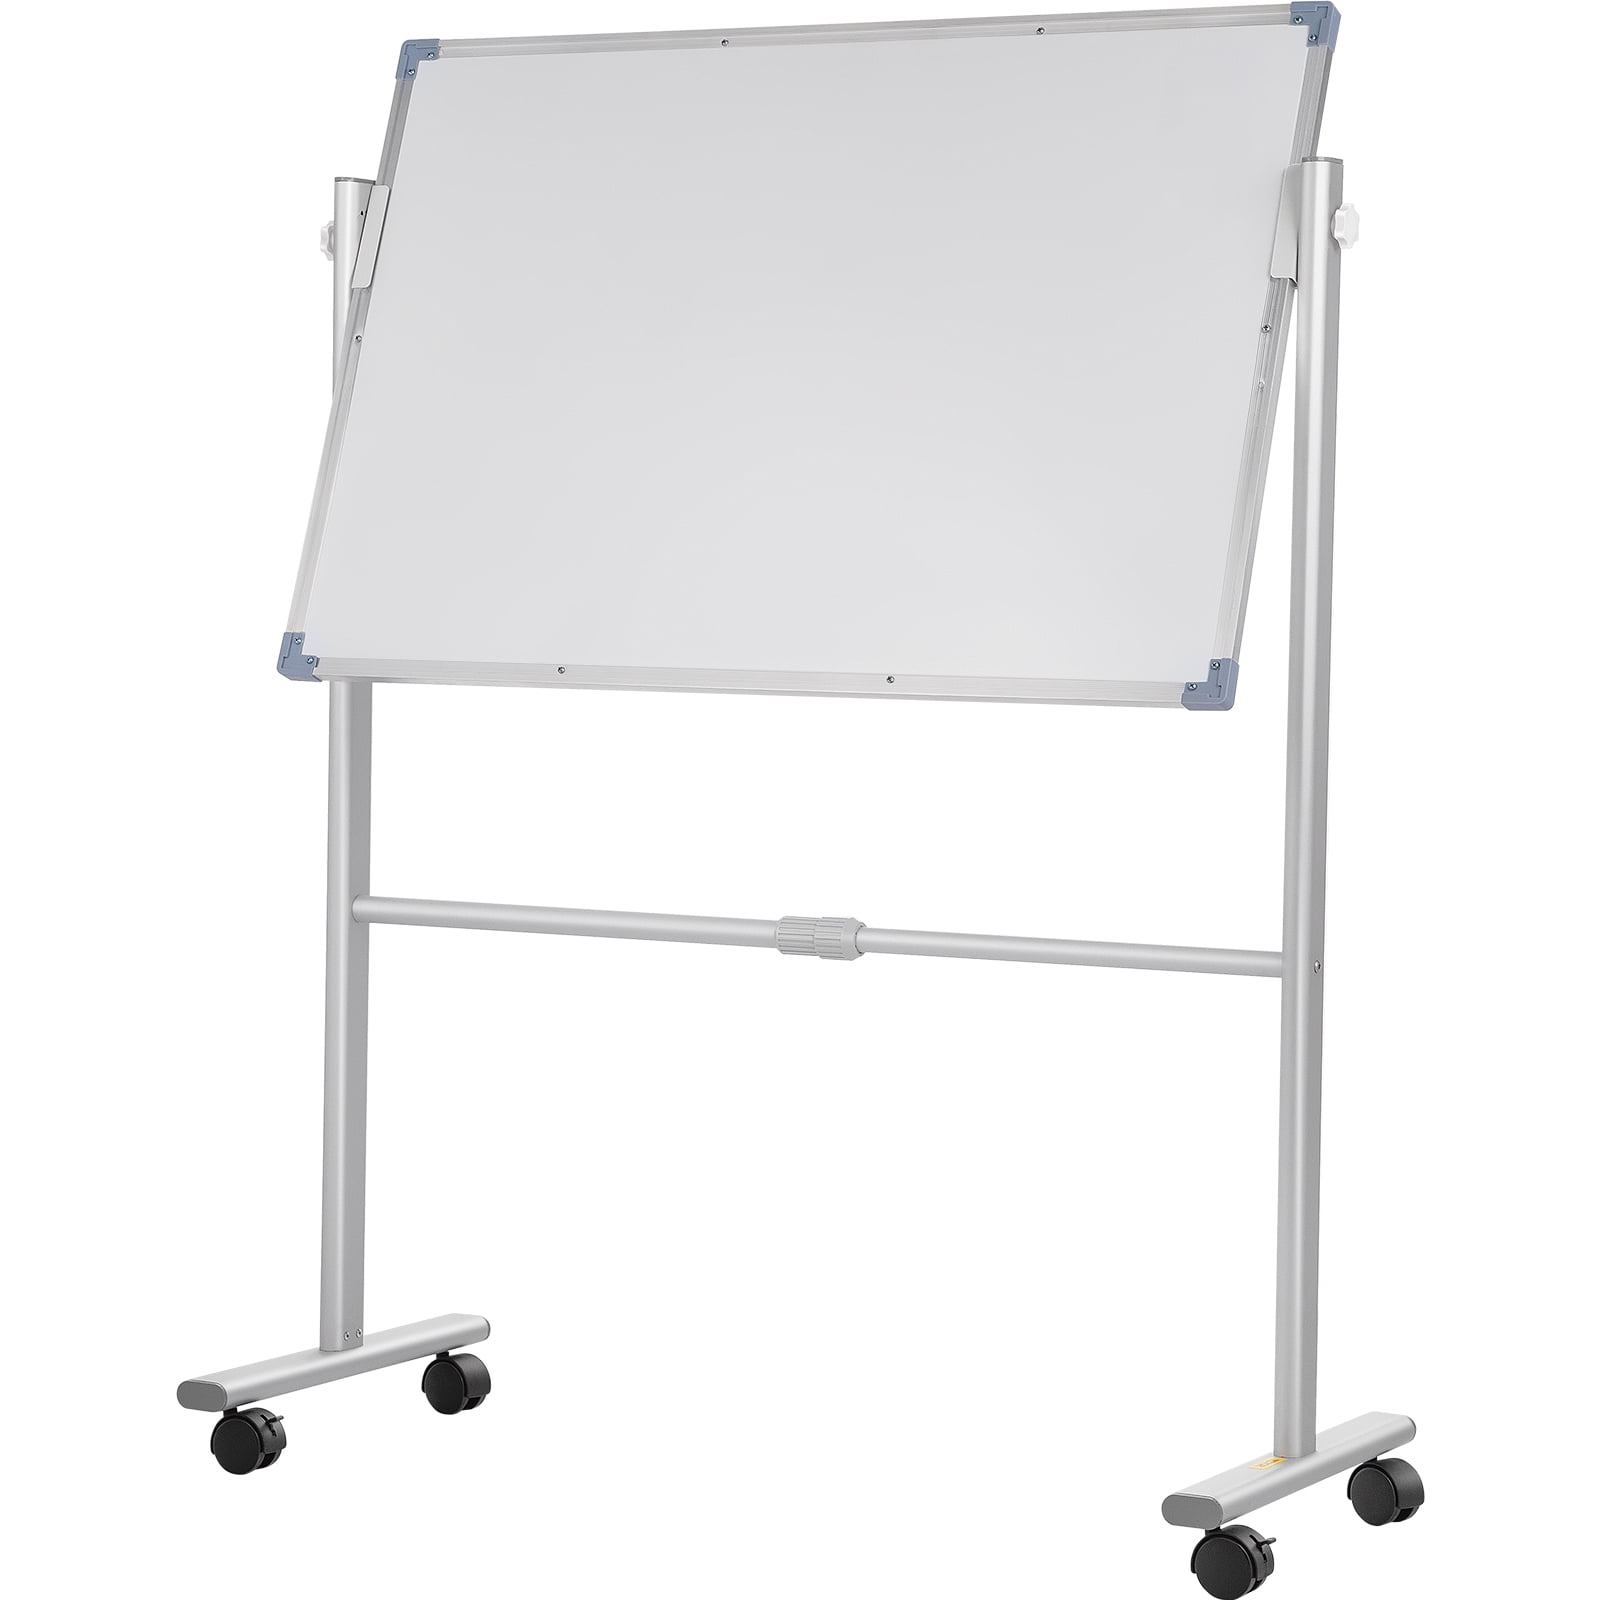 Wonderview Stand White Board, Double Sided Magnetic Dry Erase Board Portable Whiteboard 3624 inch, Perfect for Classroom, Preschool, Homeschool